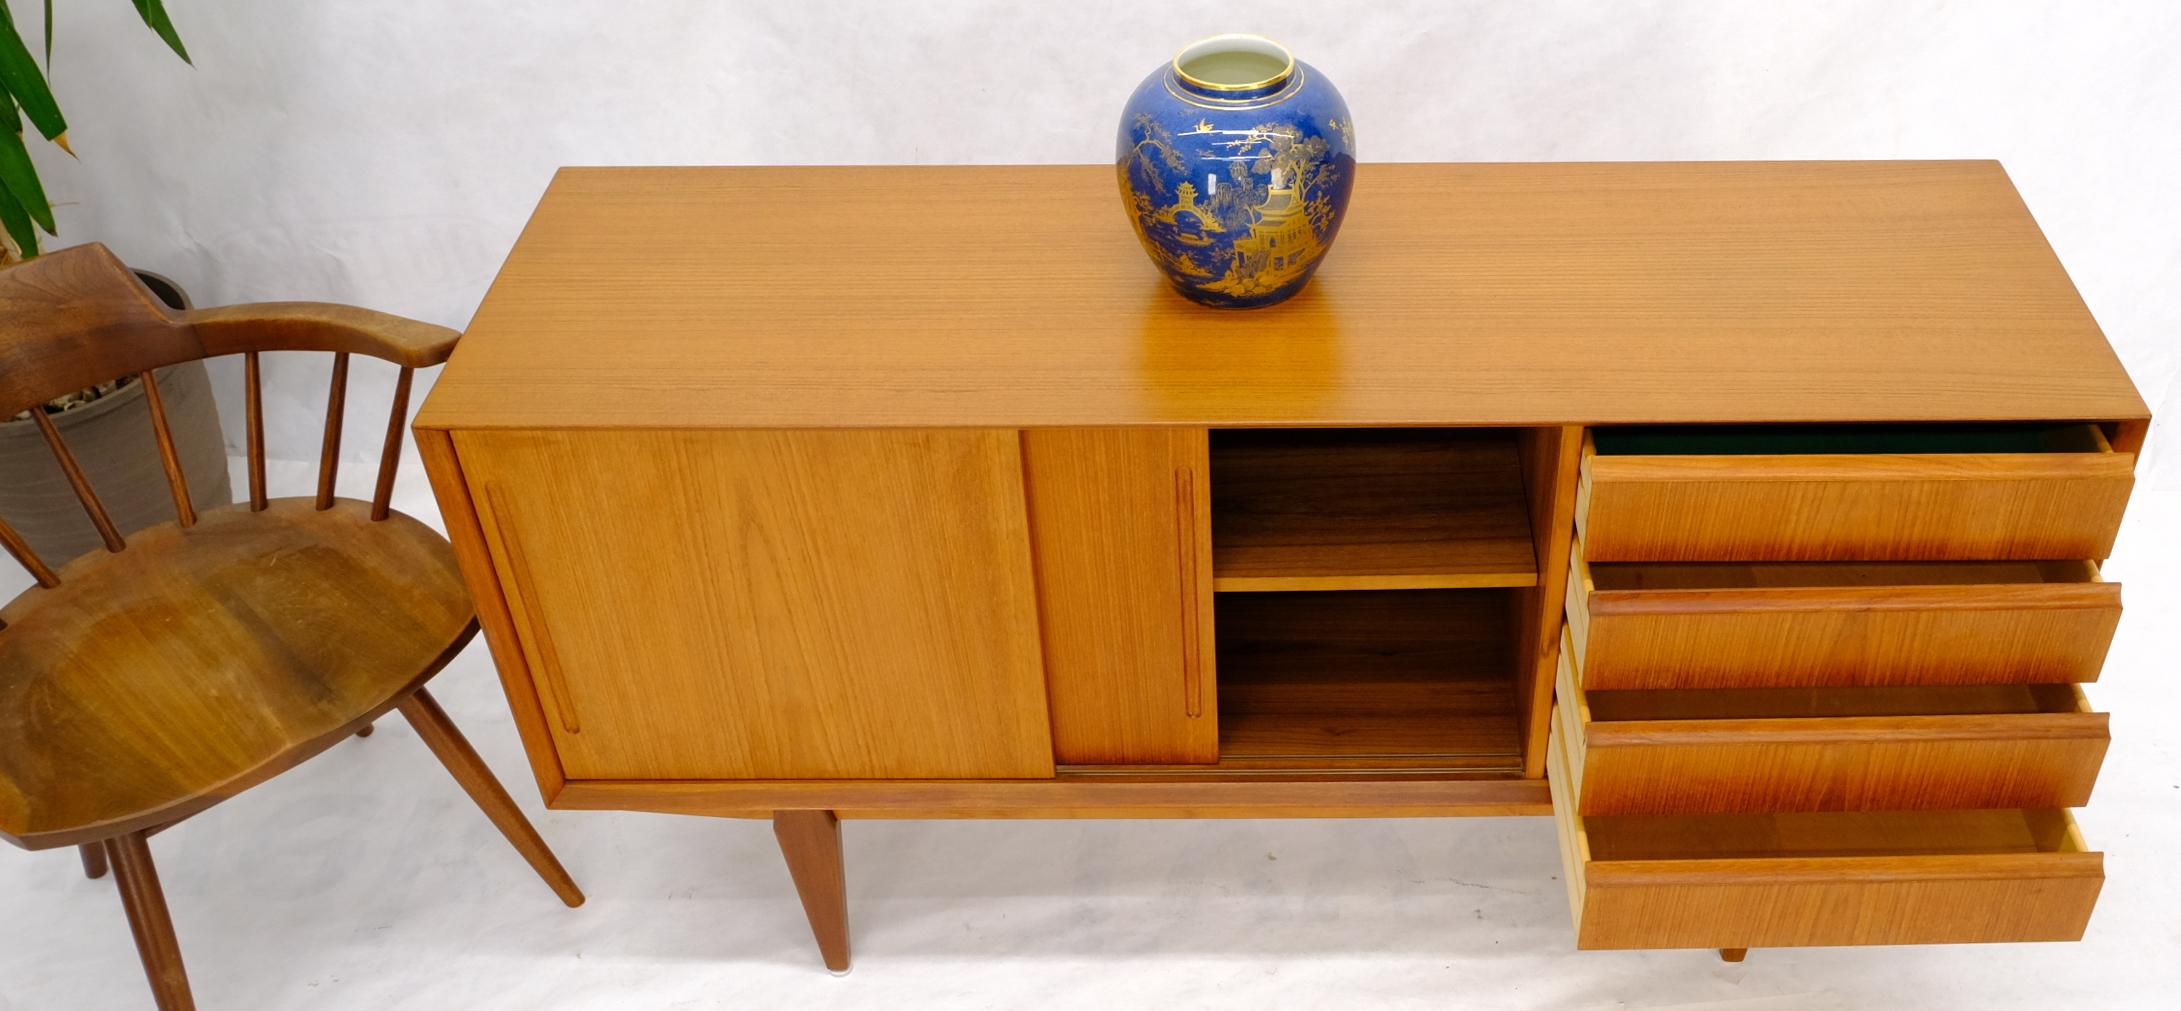 Danish Mid-Century Modern Teak Low 4 Drawers Sliding Doors Compartment Credenza For Sale 3